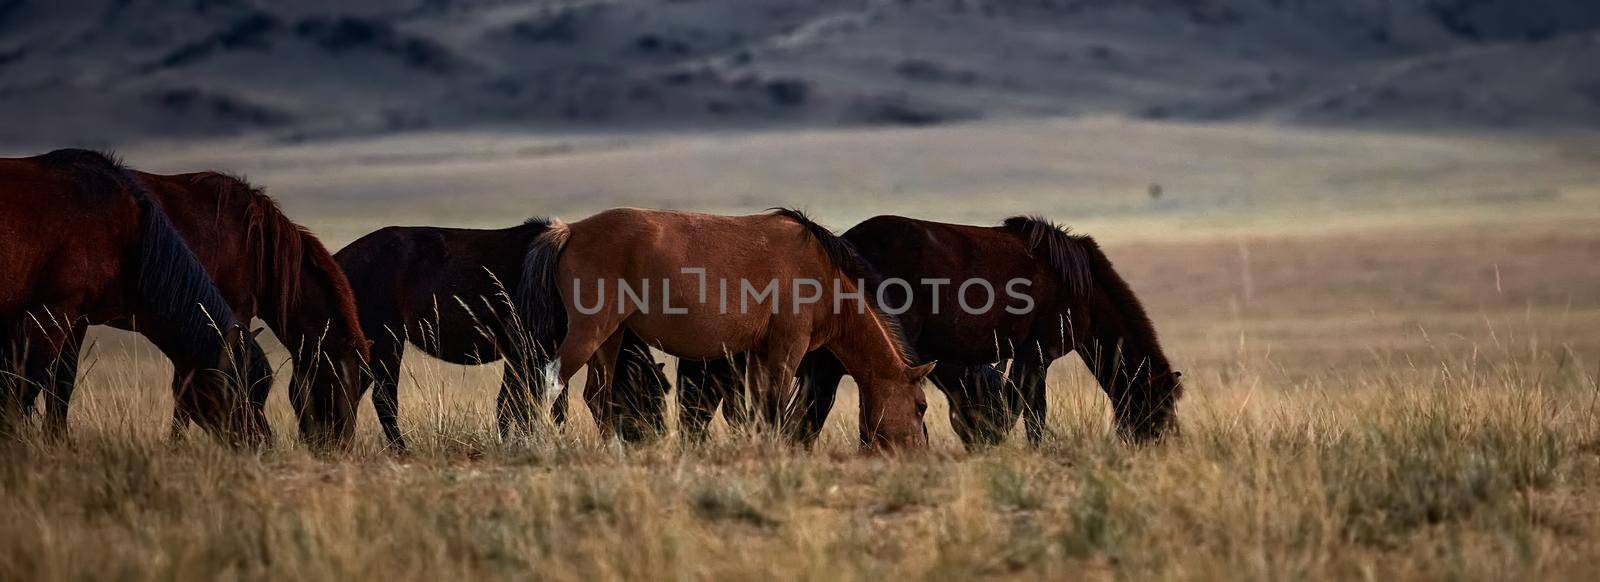 Mongolian horse in Mongolian steppe. Symbol of nomadic life. by EvgeniyQW